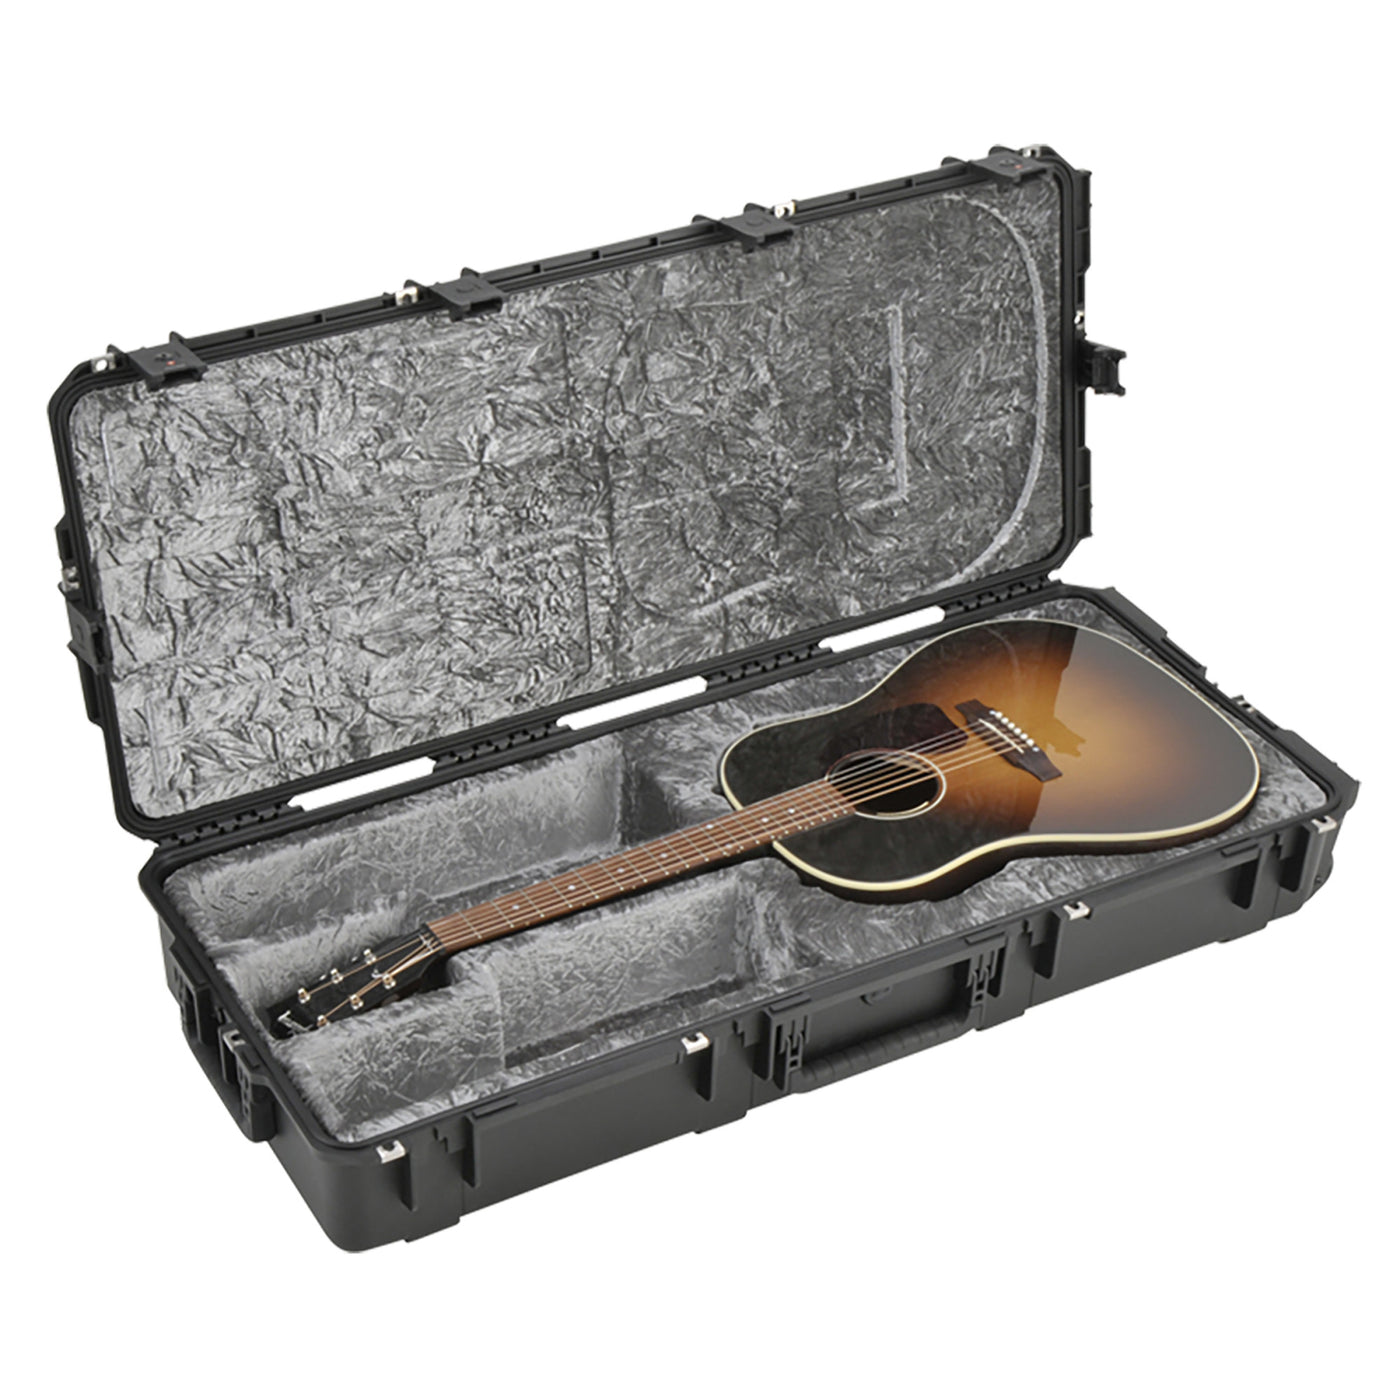 SKB Cases 3i-4217-18 iSeries Waterproof Hardshell Acoustic Guitar Case with Pressure Equalization, Wheels, and TSA Locking Latch System